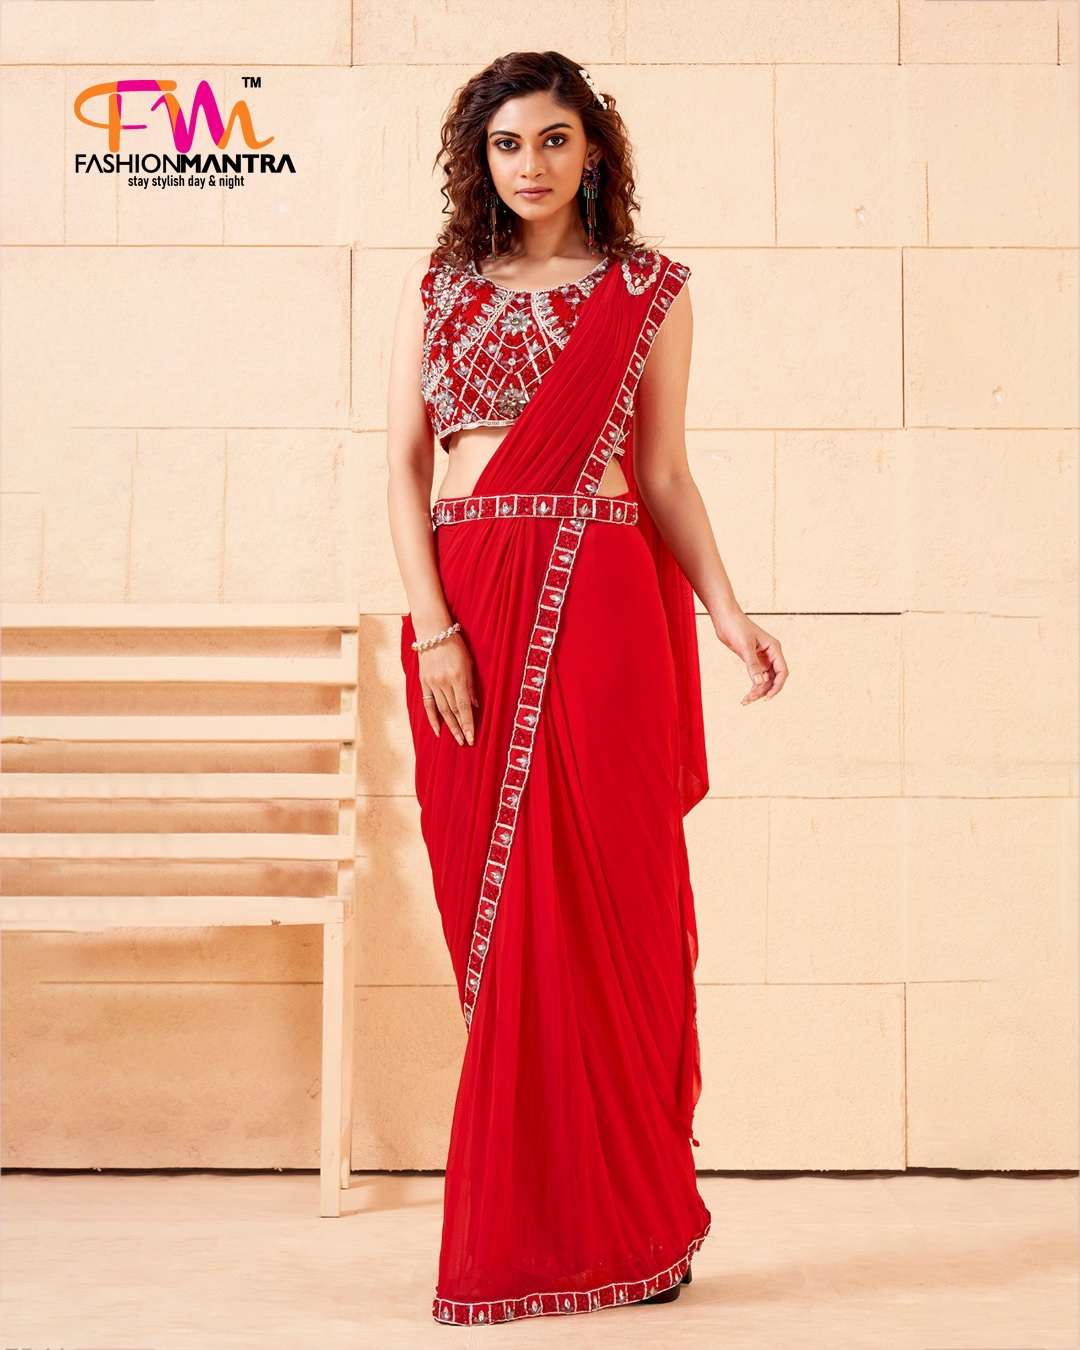 Step out in Style With Georgette Sarees Fashion Mantra